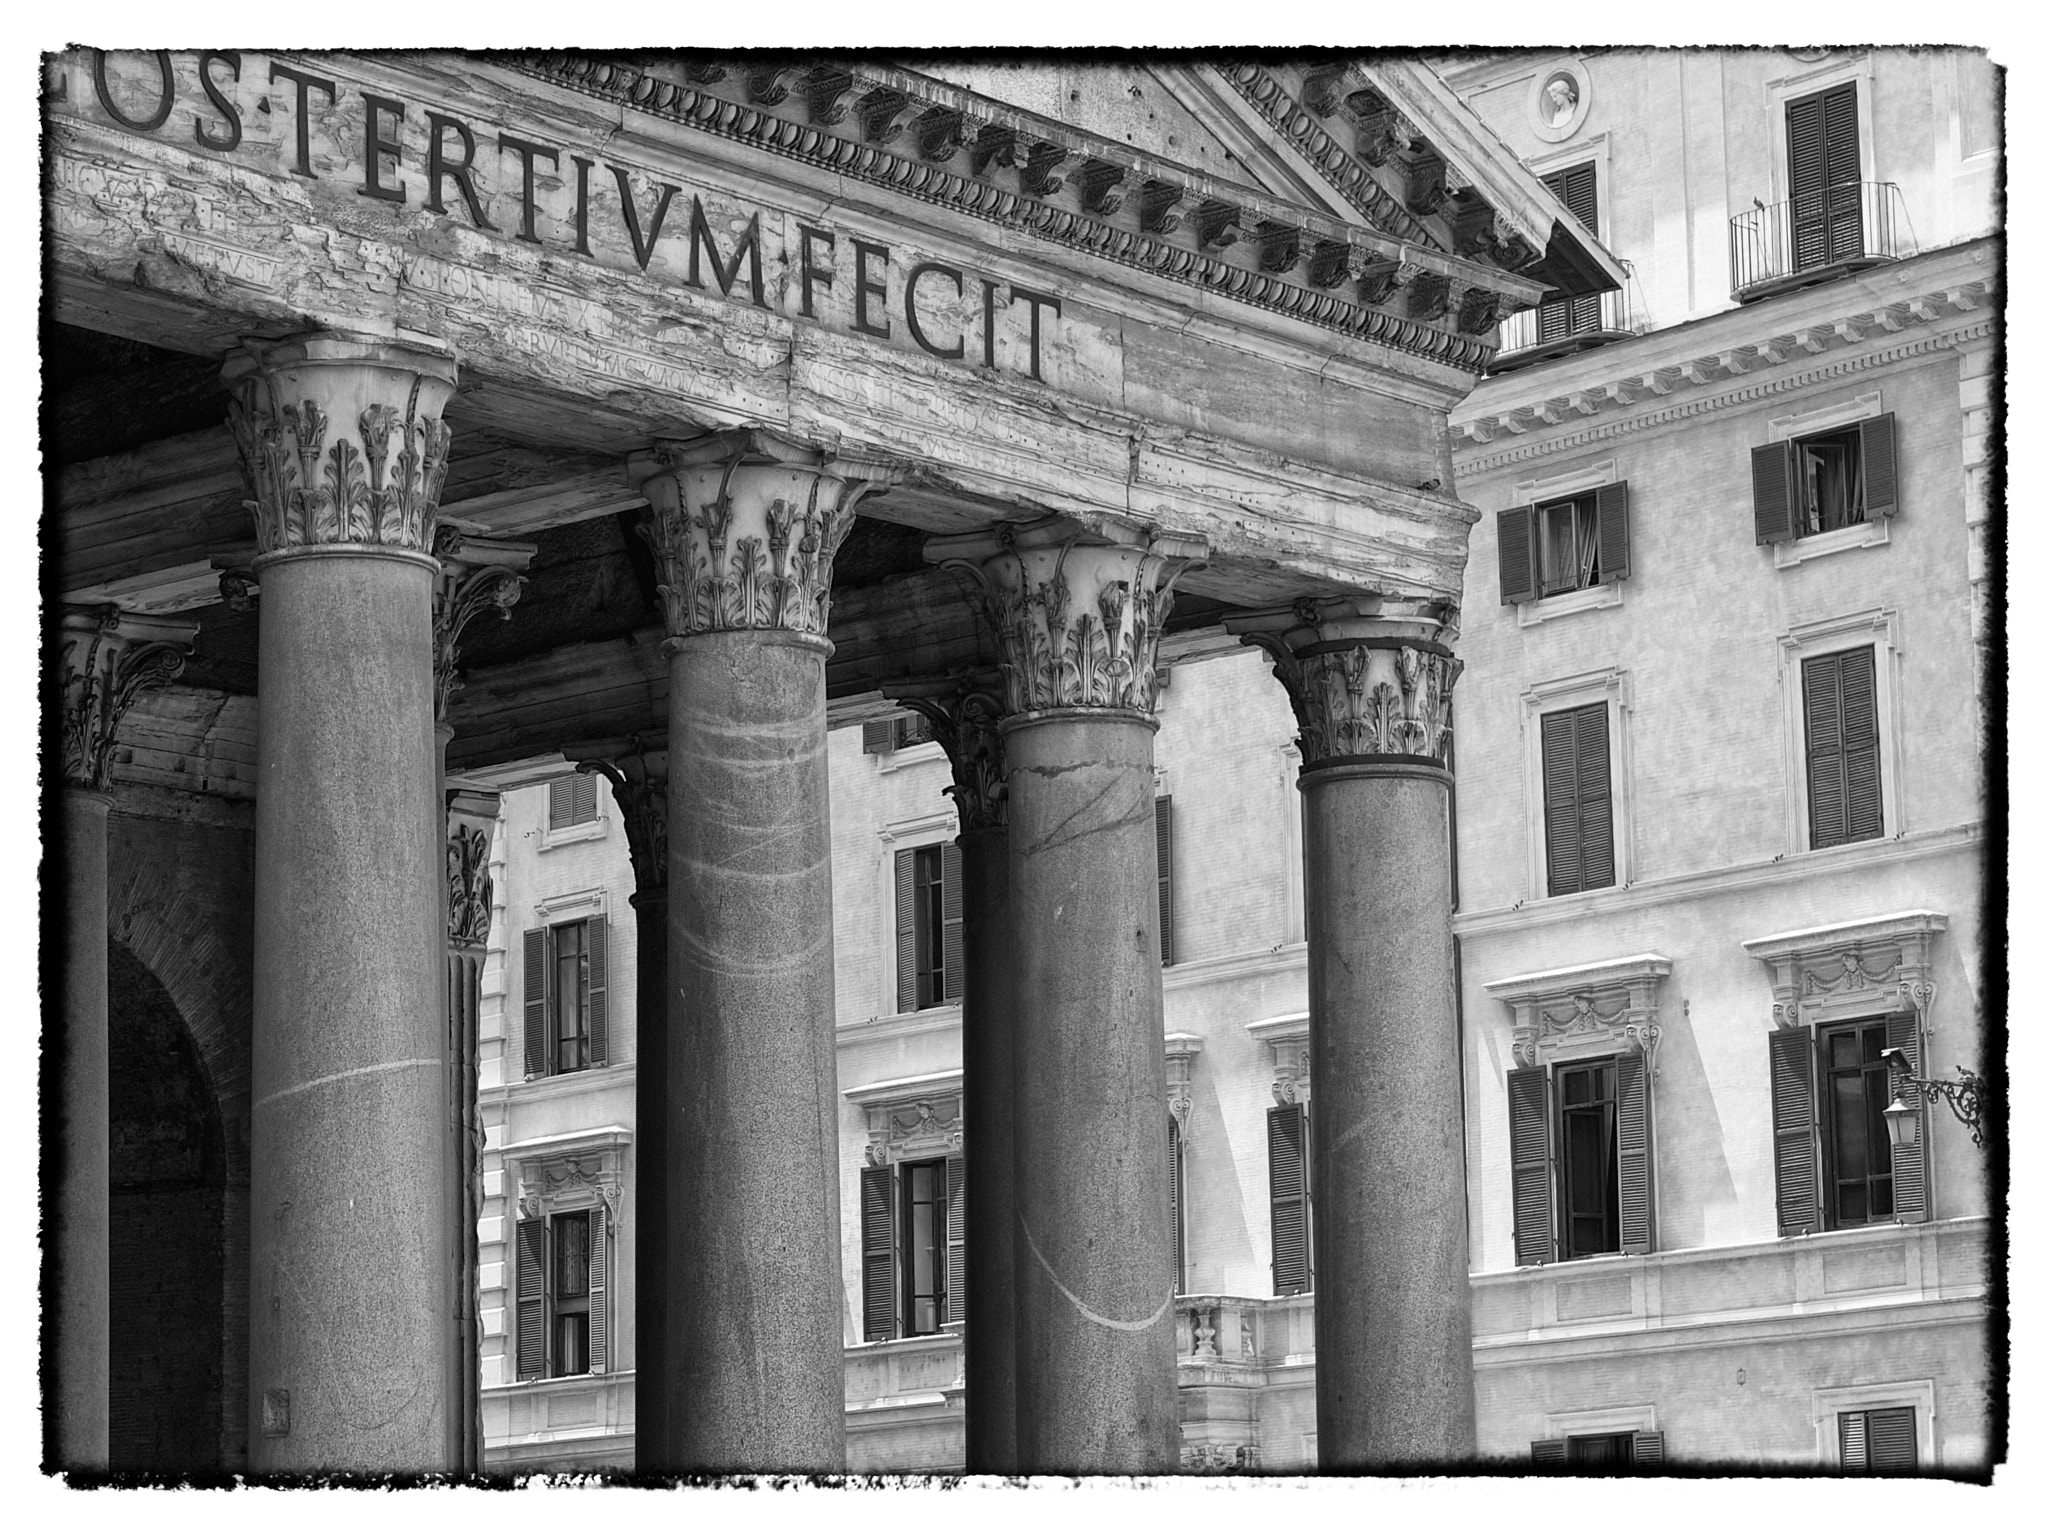 Leica Digilux 3 sample photo. Marcus agrippa's place in rome! photography